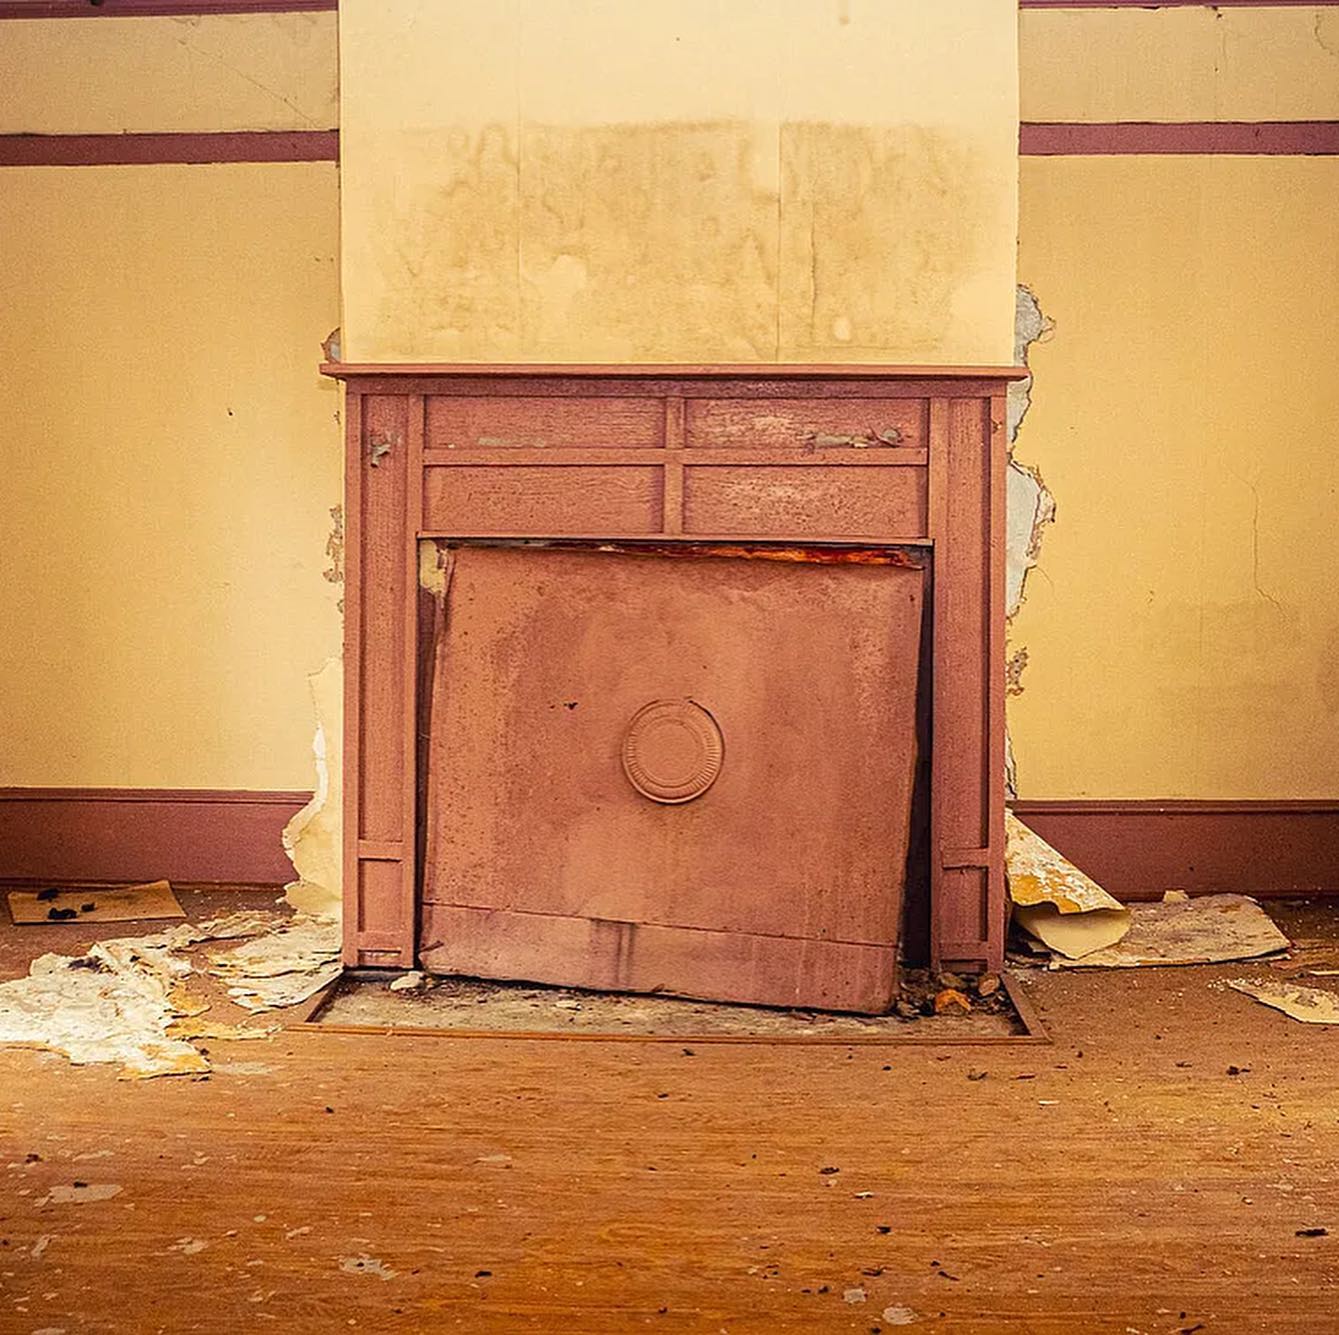 Photograph of the inside of an old house with no furniture. In the center is a fireplace, with aparent smoke stains above it. Plaster is falling down around it onto the wooden floor.